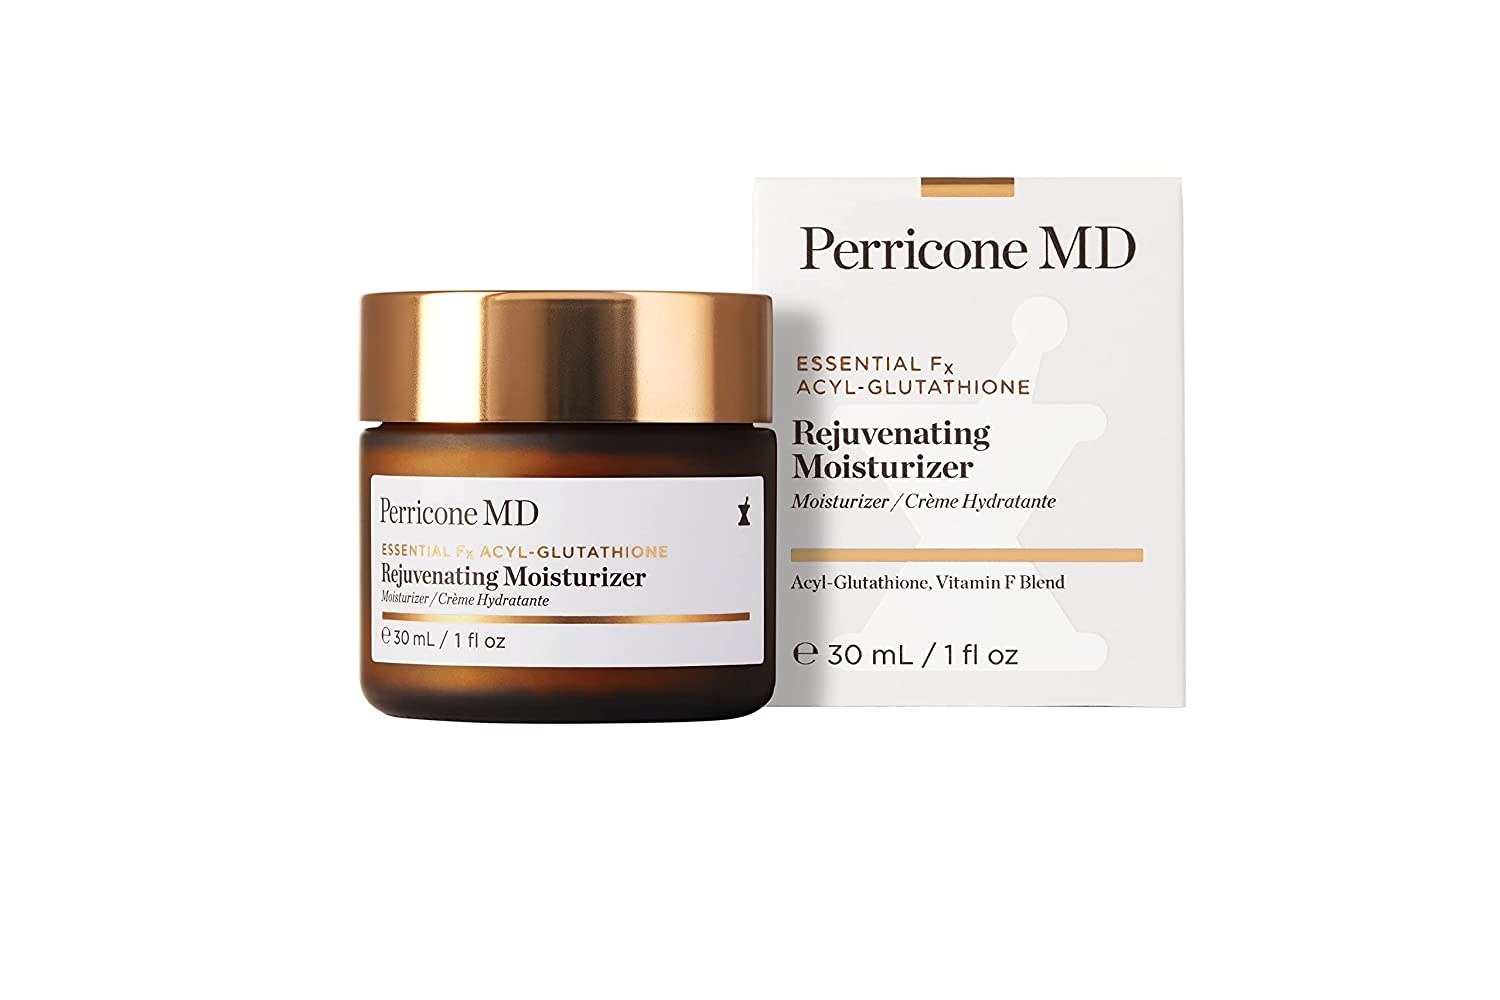 Perricone MD essential fix with box on a white background